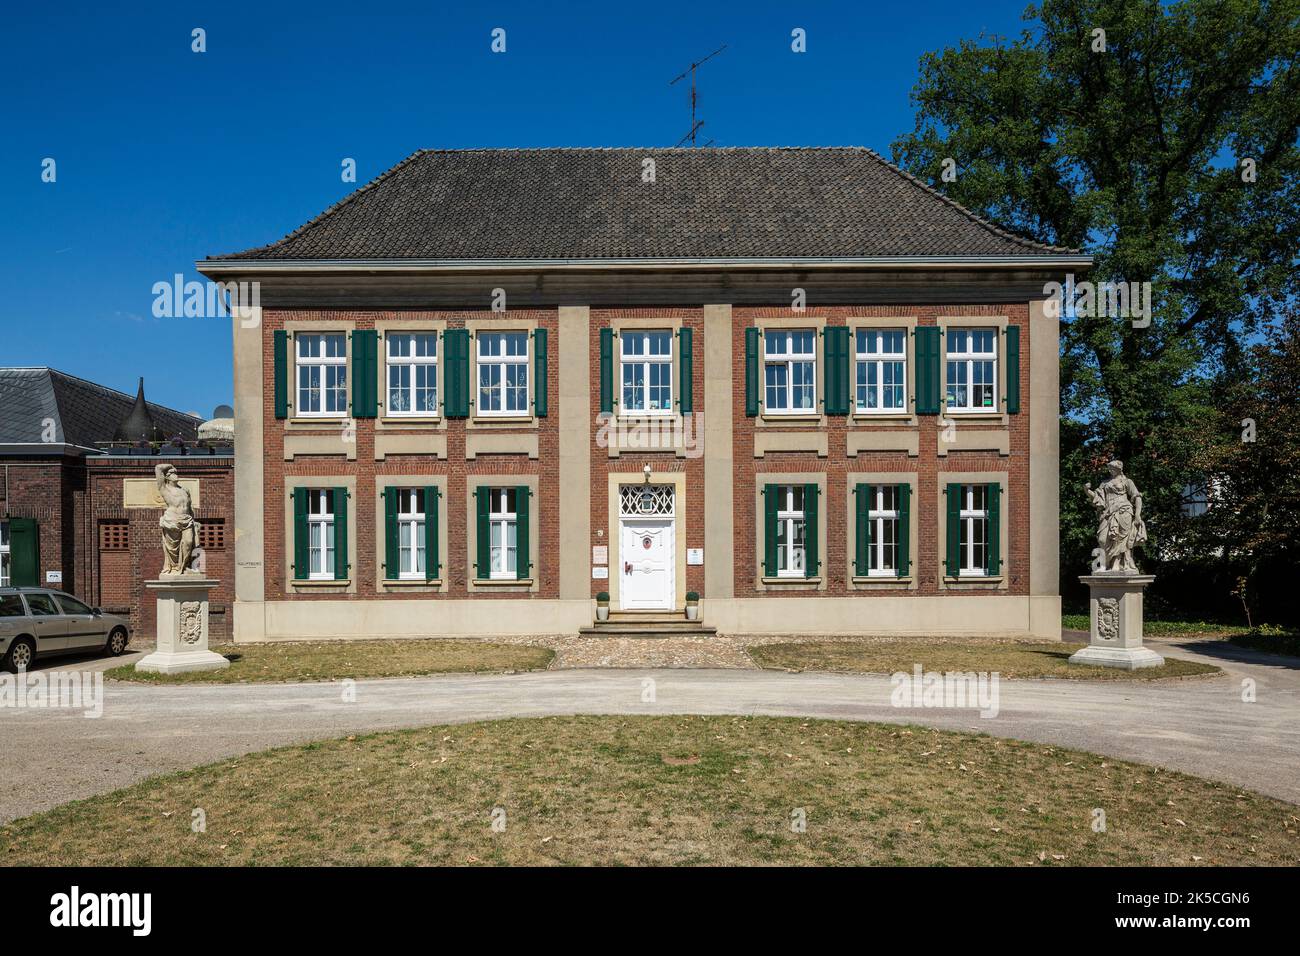 Germany, Bocholt, Lower Rhine, Westmuensterland, Muensterland, Westphalia, North Rhine-Westphalia, NRW, Haus Woord, manor house, late baroque, classicism, statues, depictions of gods Stock Photo